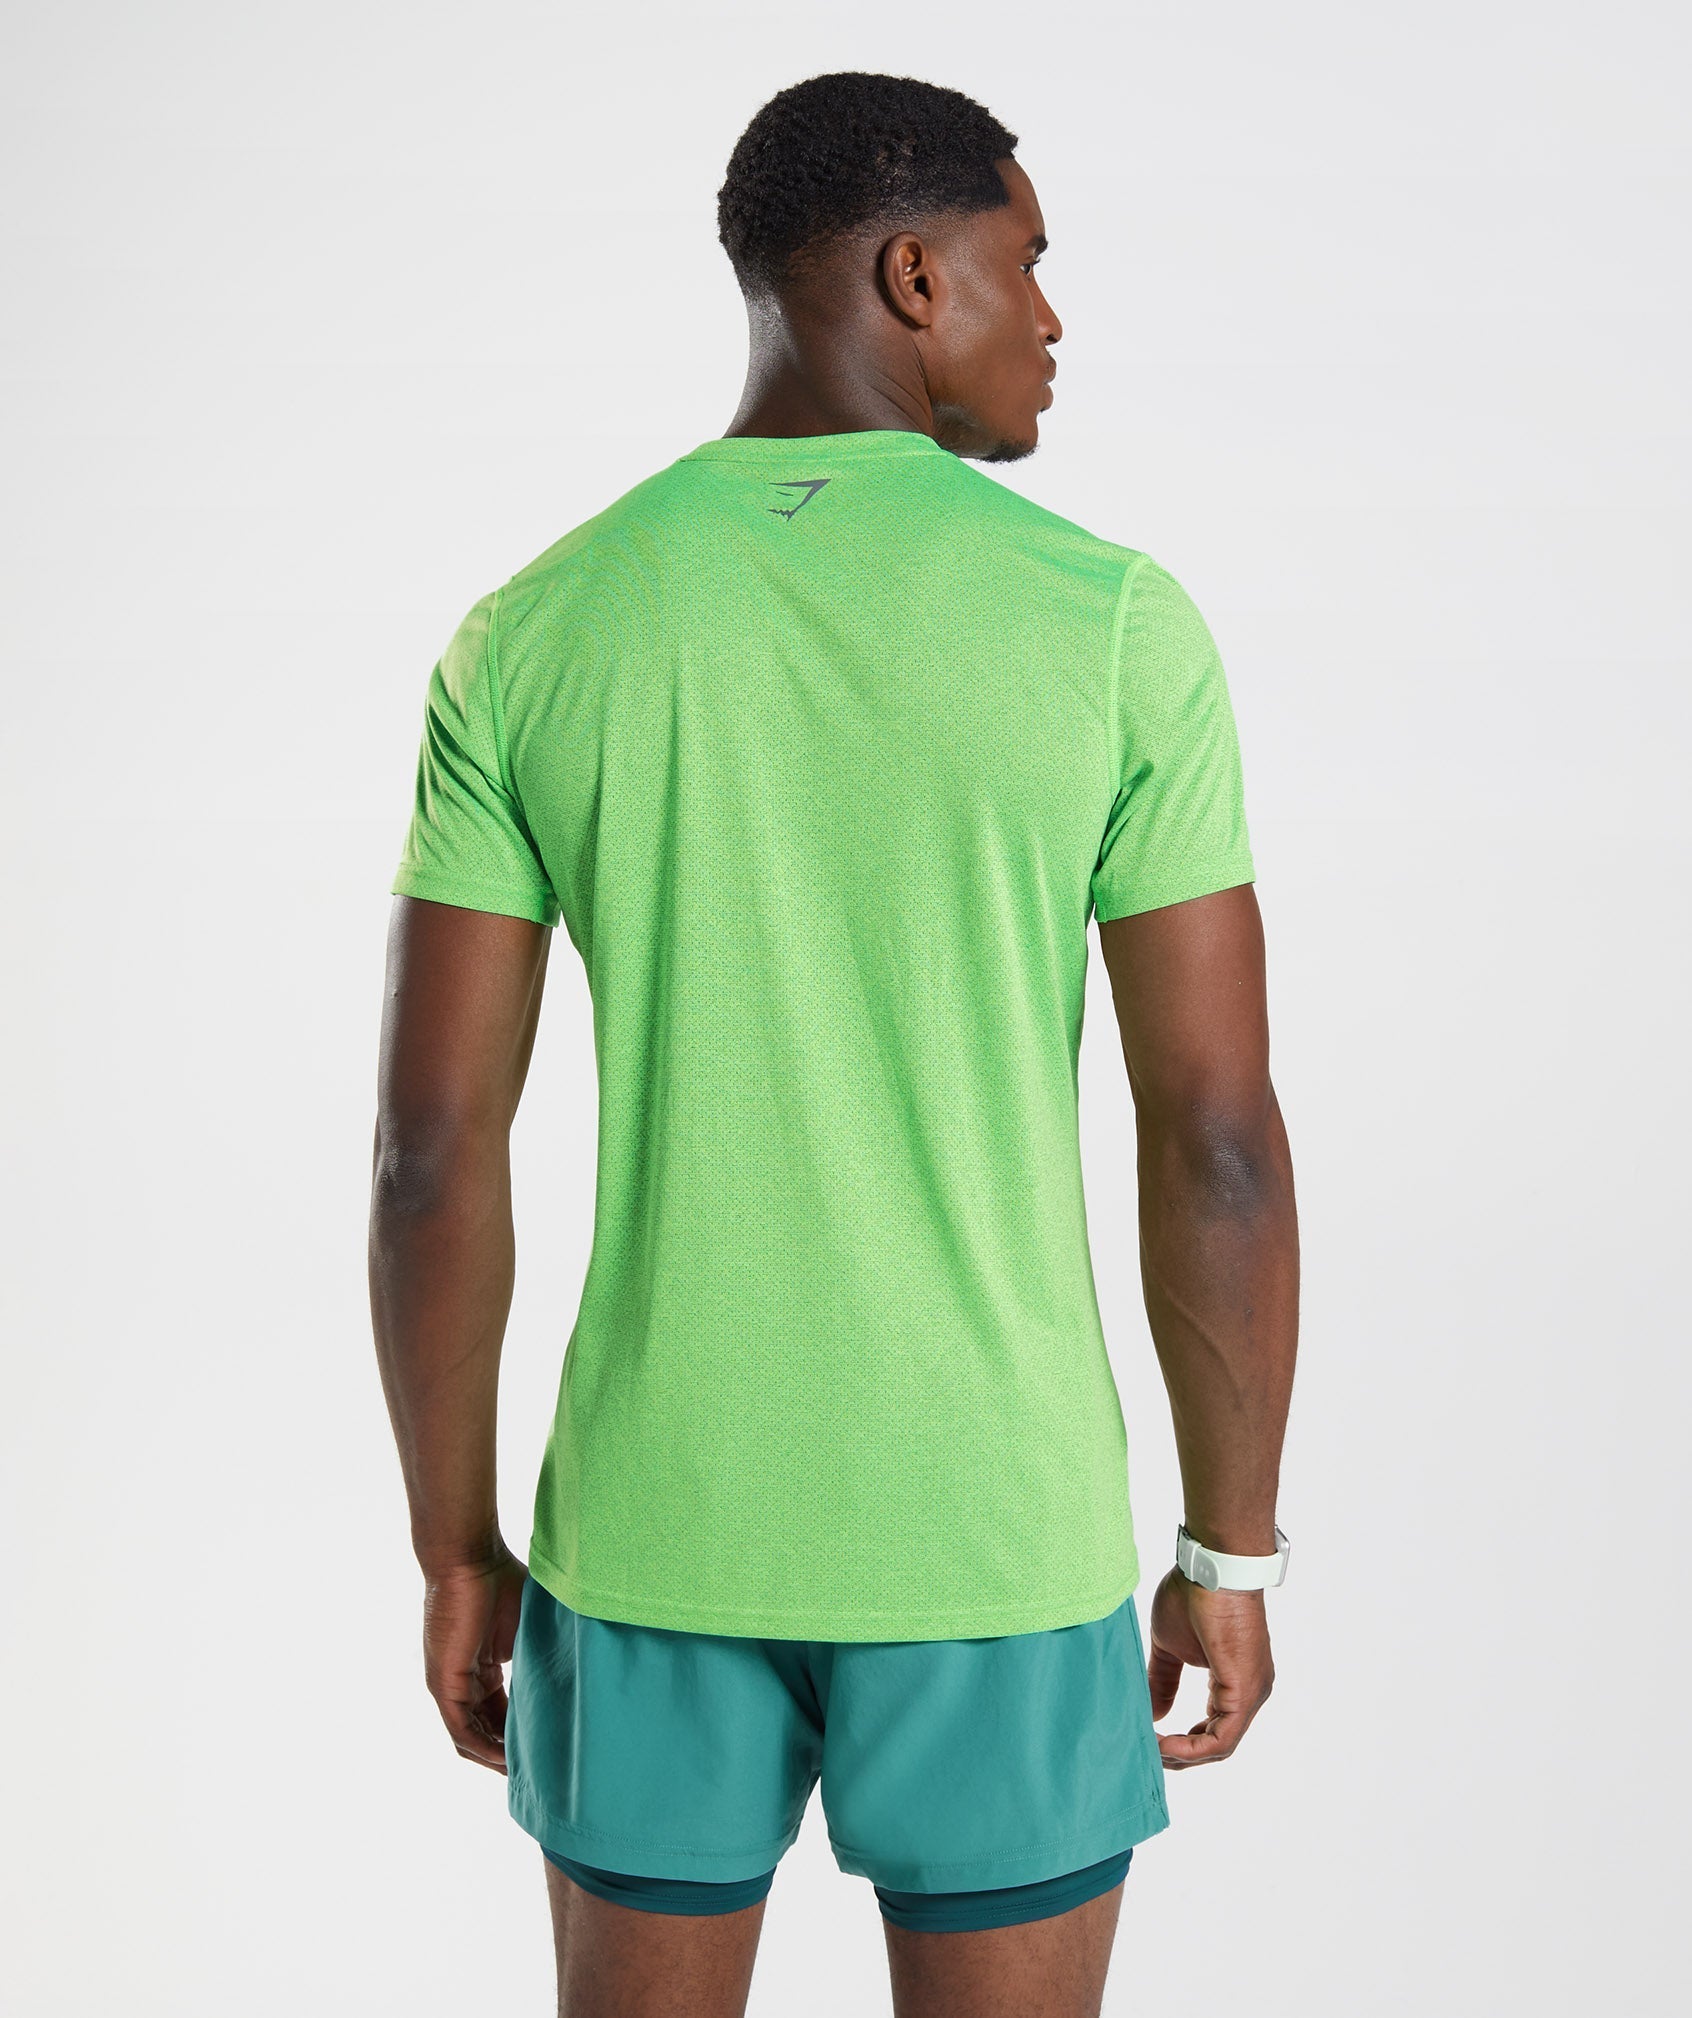 Sport T-Shirt in Fluo Lime/Black Marl - view 2